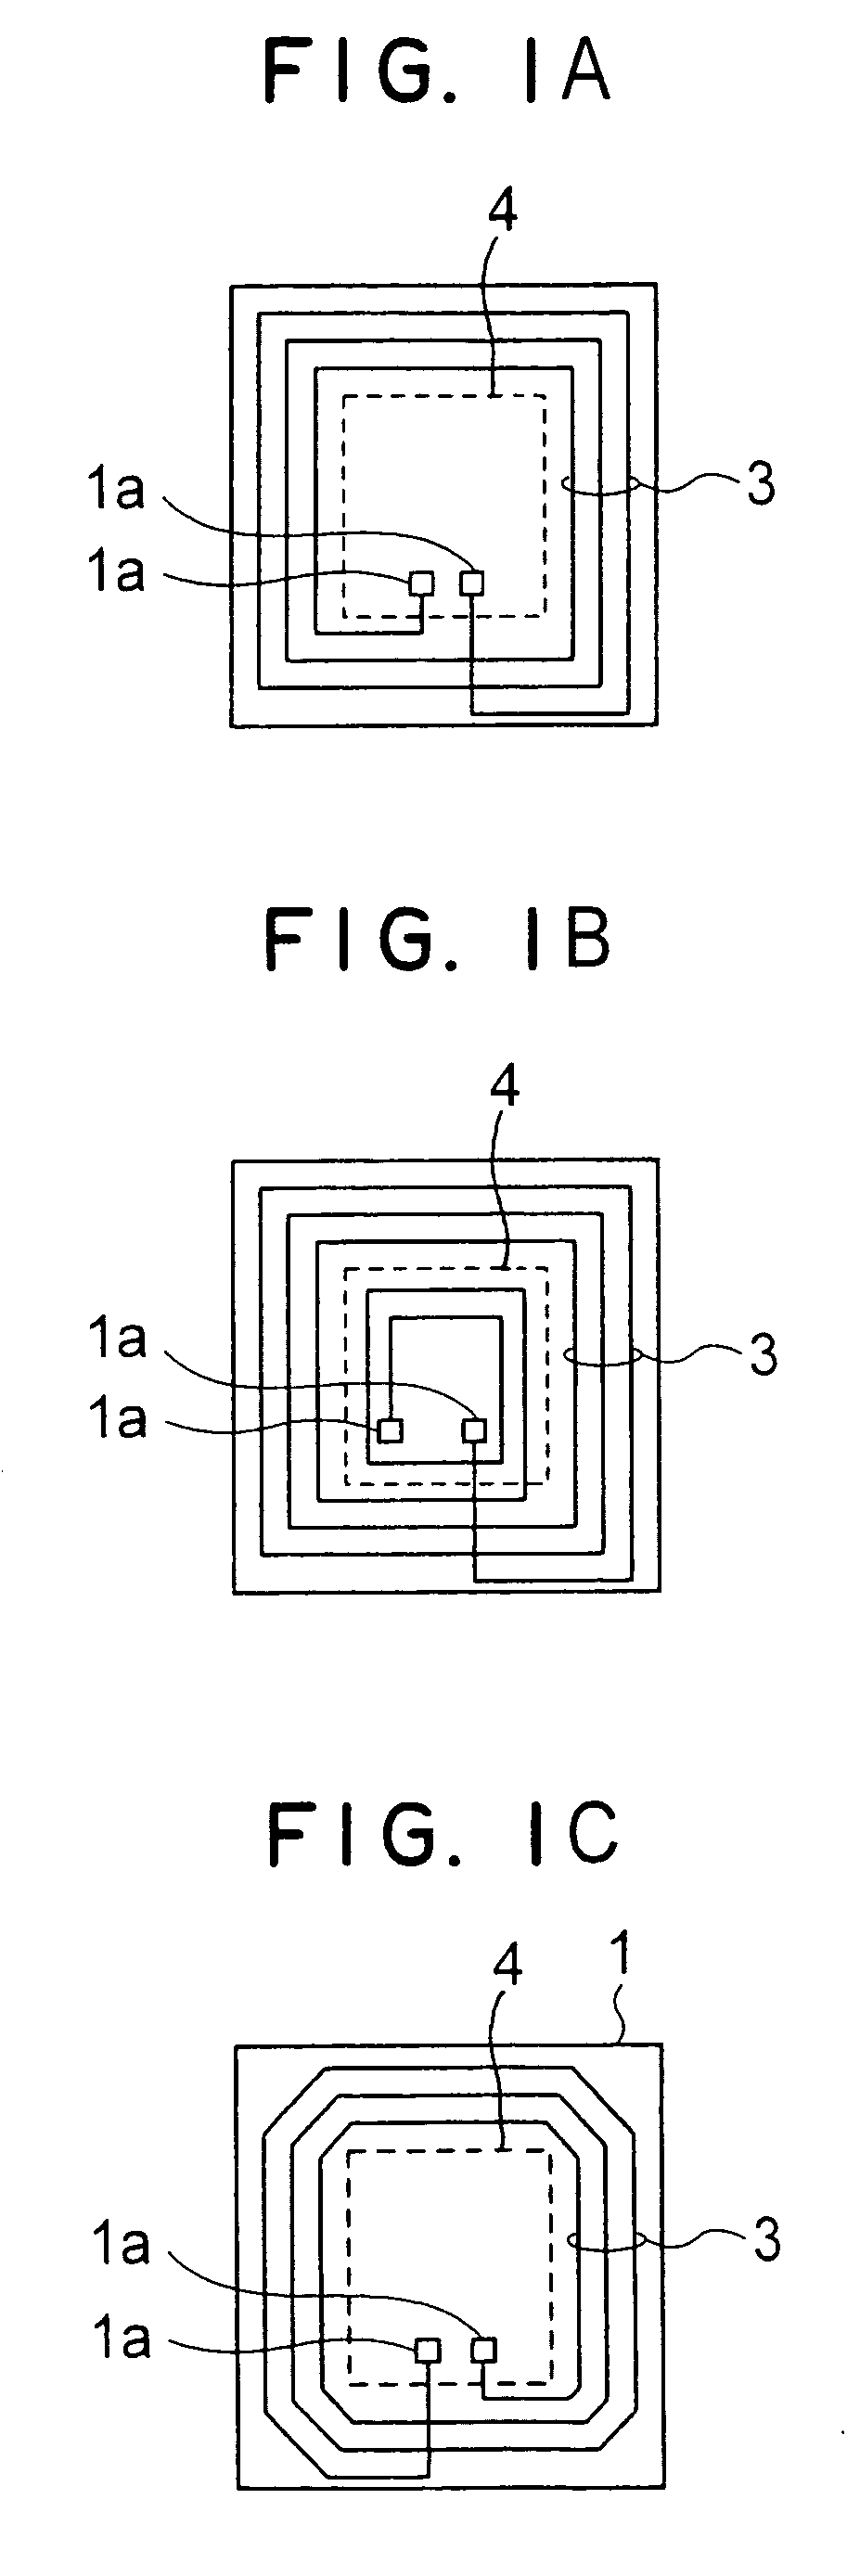 Method of manufacturing an IC coil mounted in an information carrier